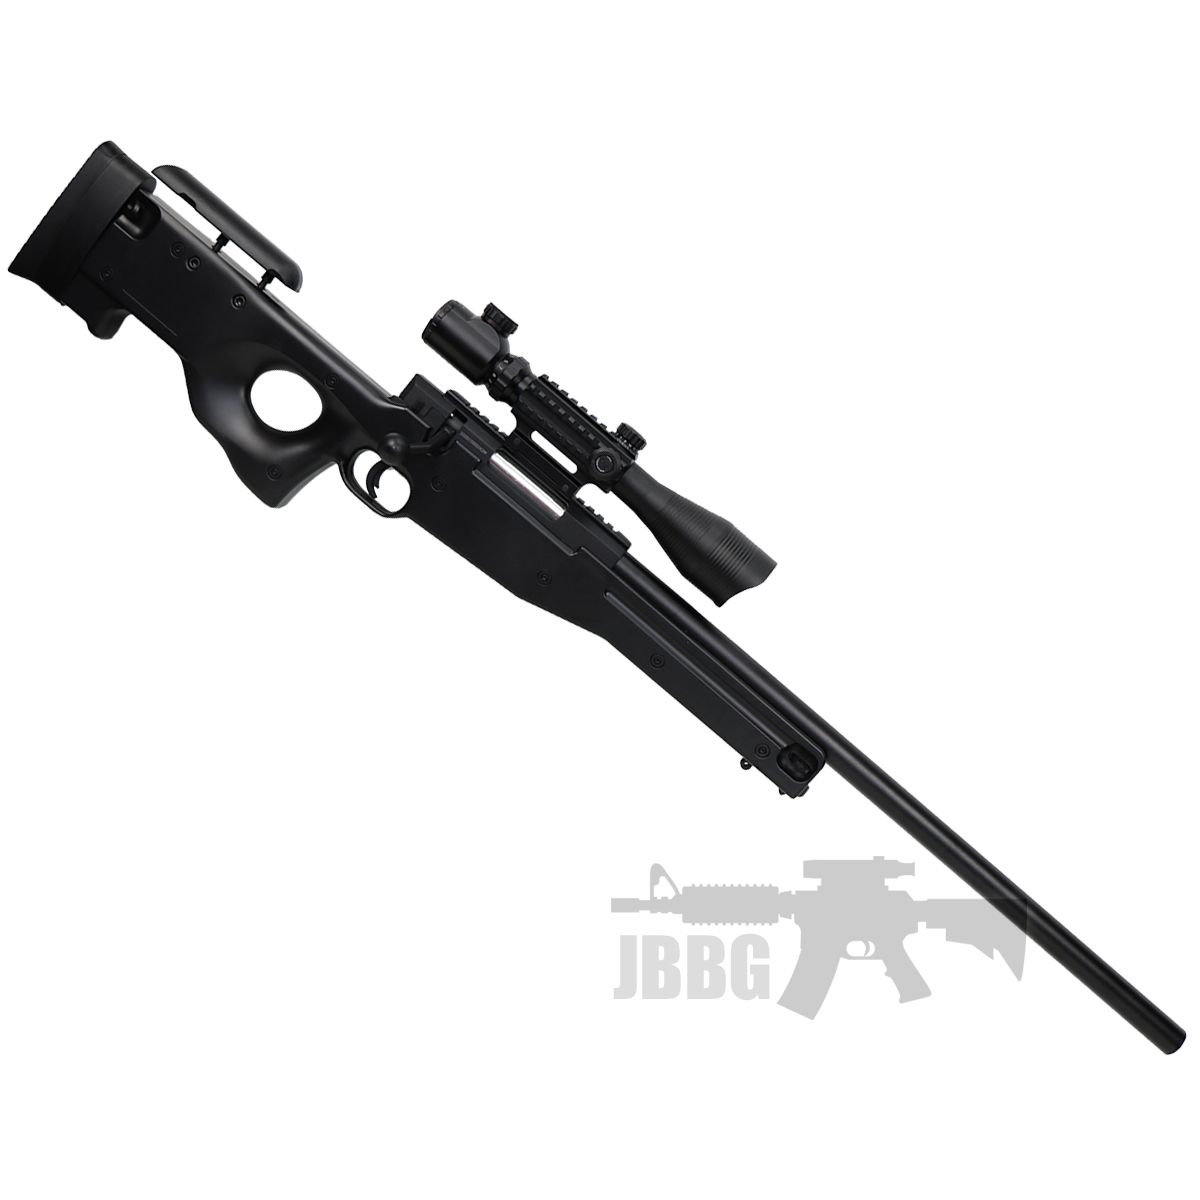 UK Arms ZM52 Spring Powered Bolt Action Sniper Rifle Airsoft BB Gun Black for sale online 